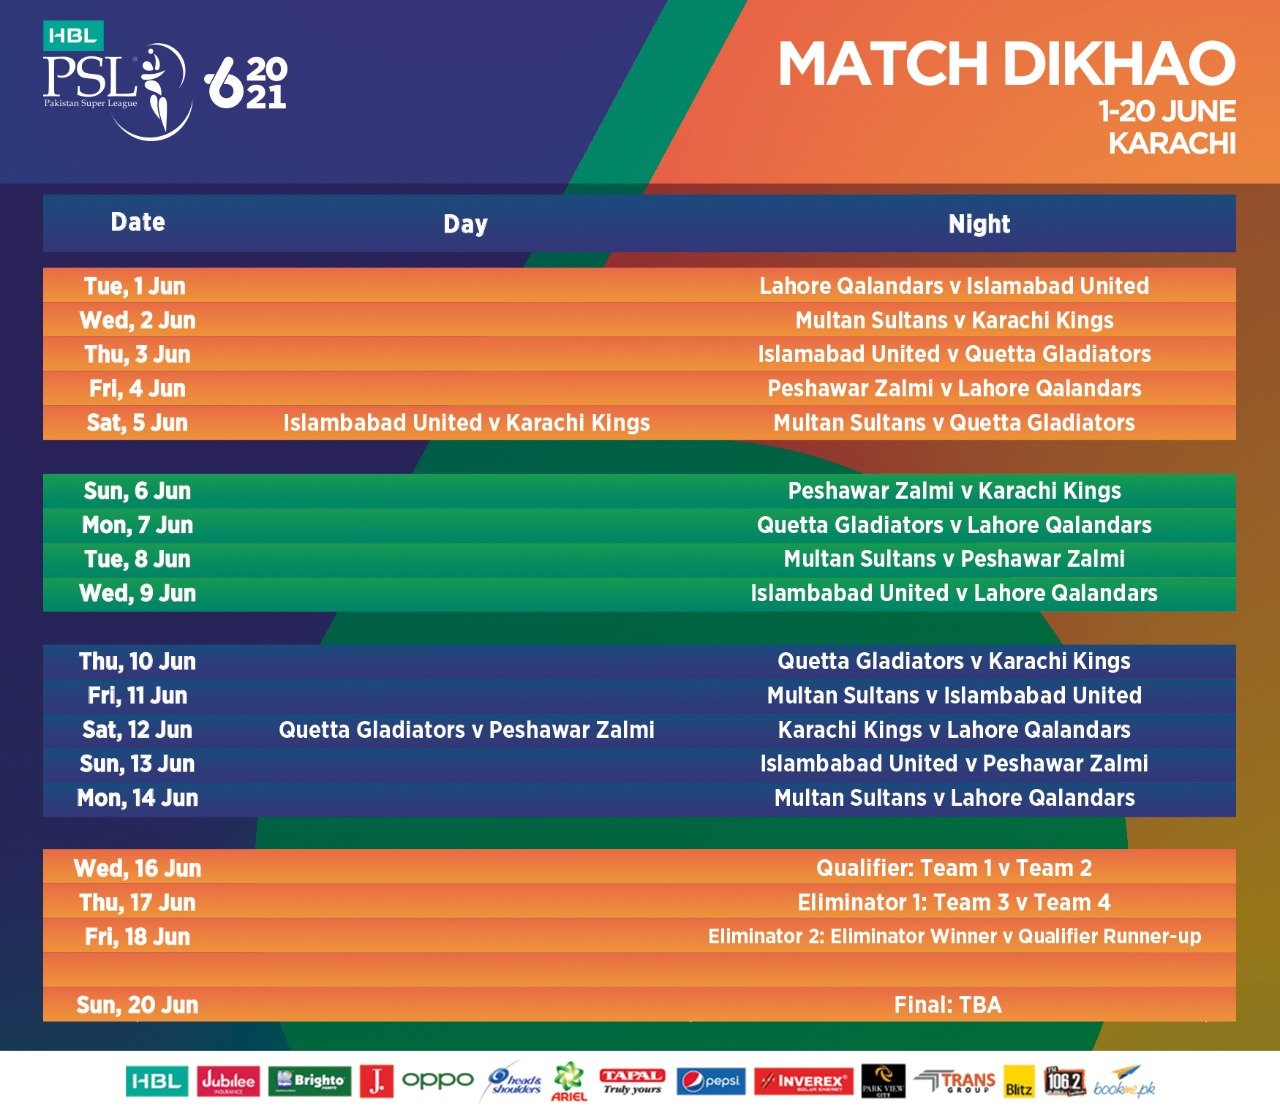 Schedule of remaining HBL PSL 6 matches confirmed, PCB Hall of Fame launched Press Release PCB